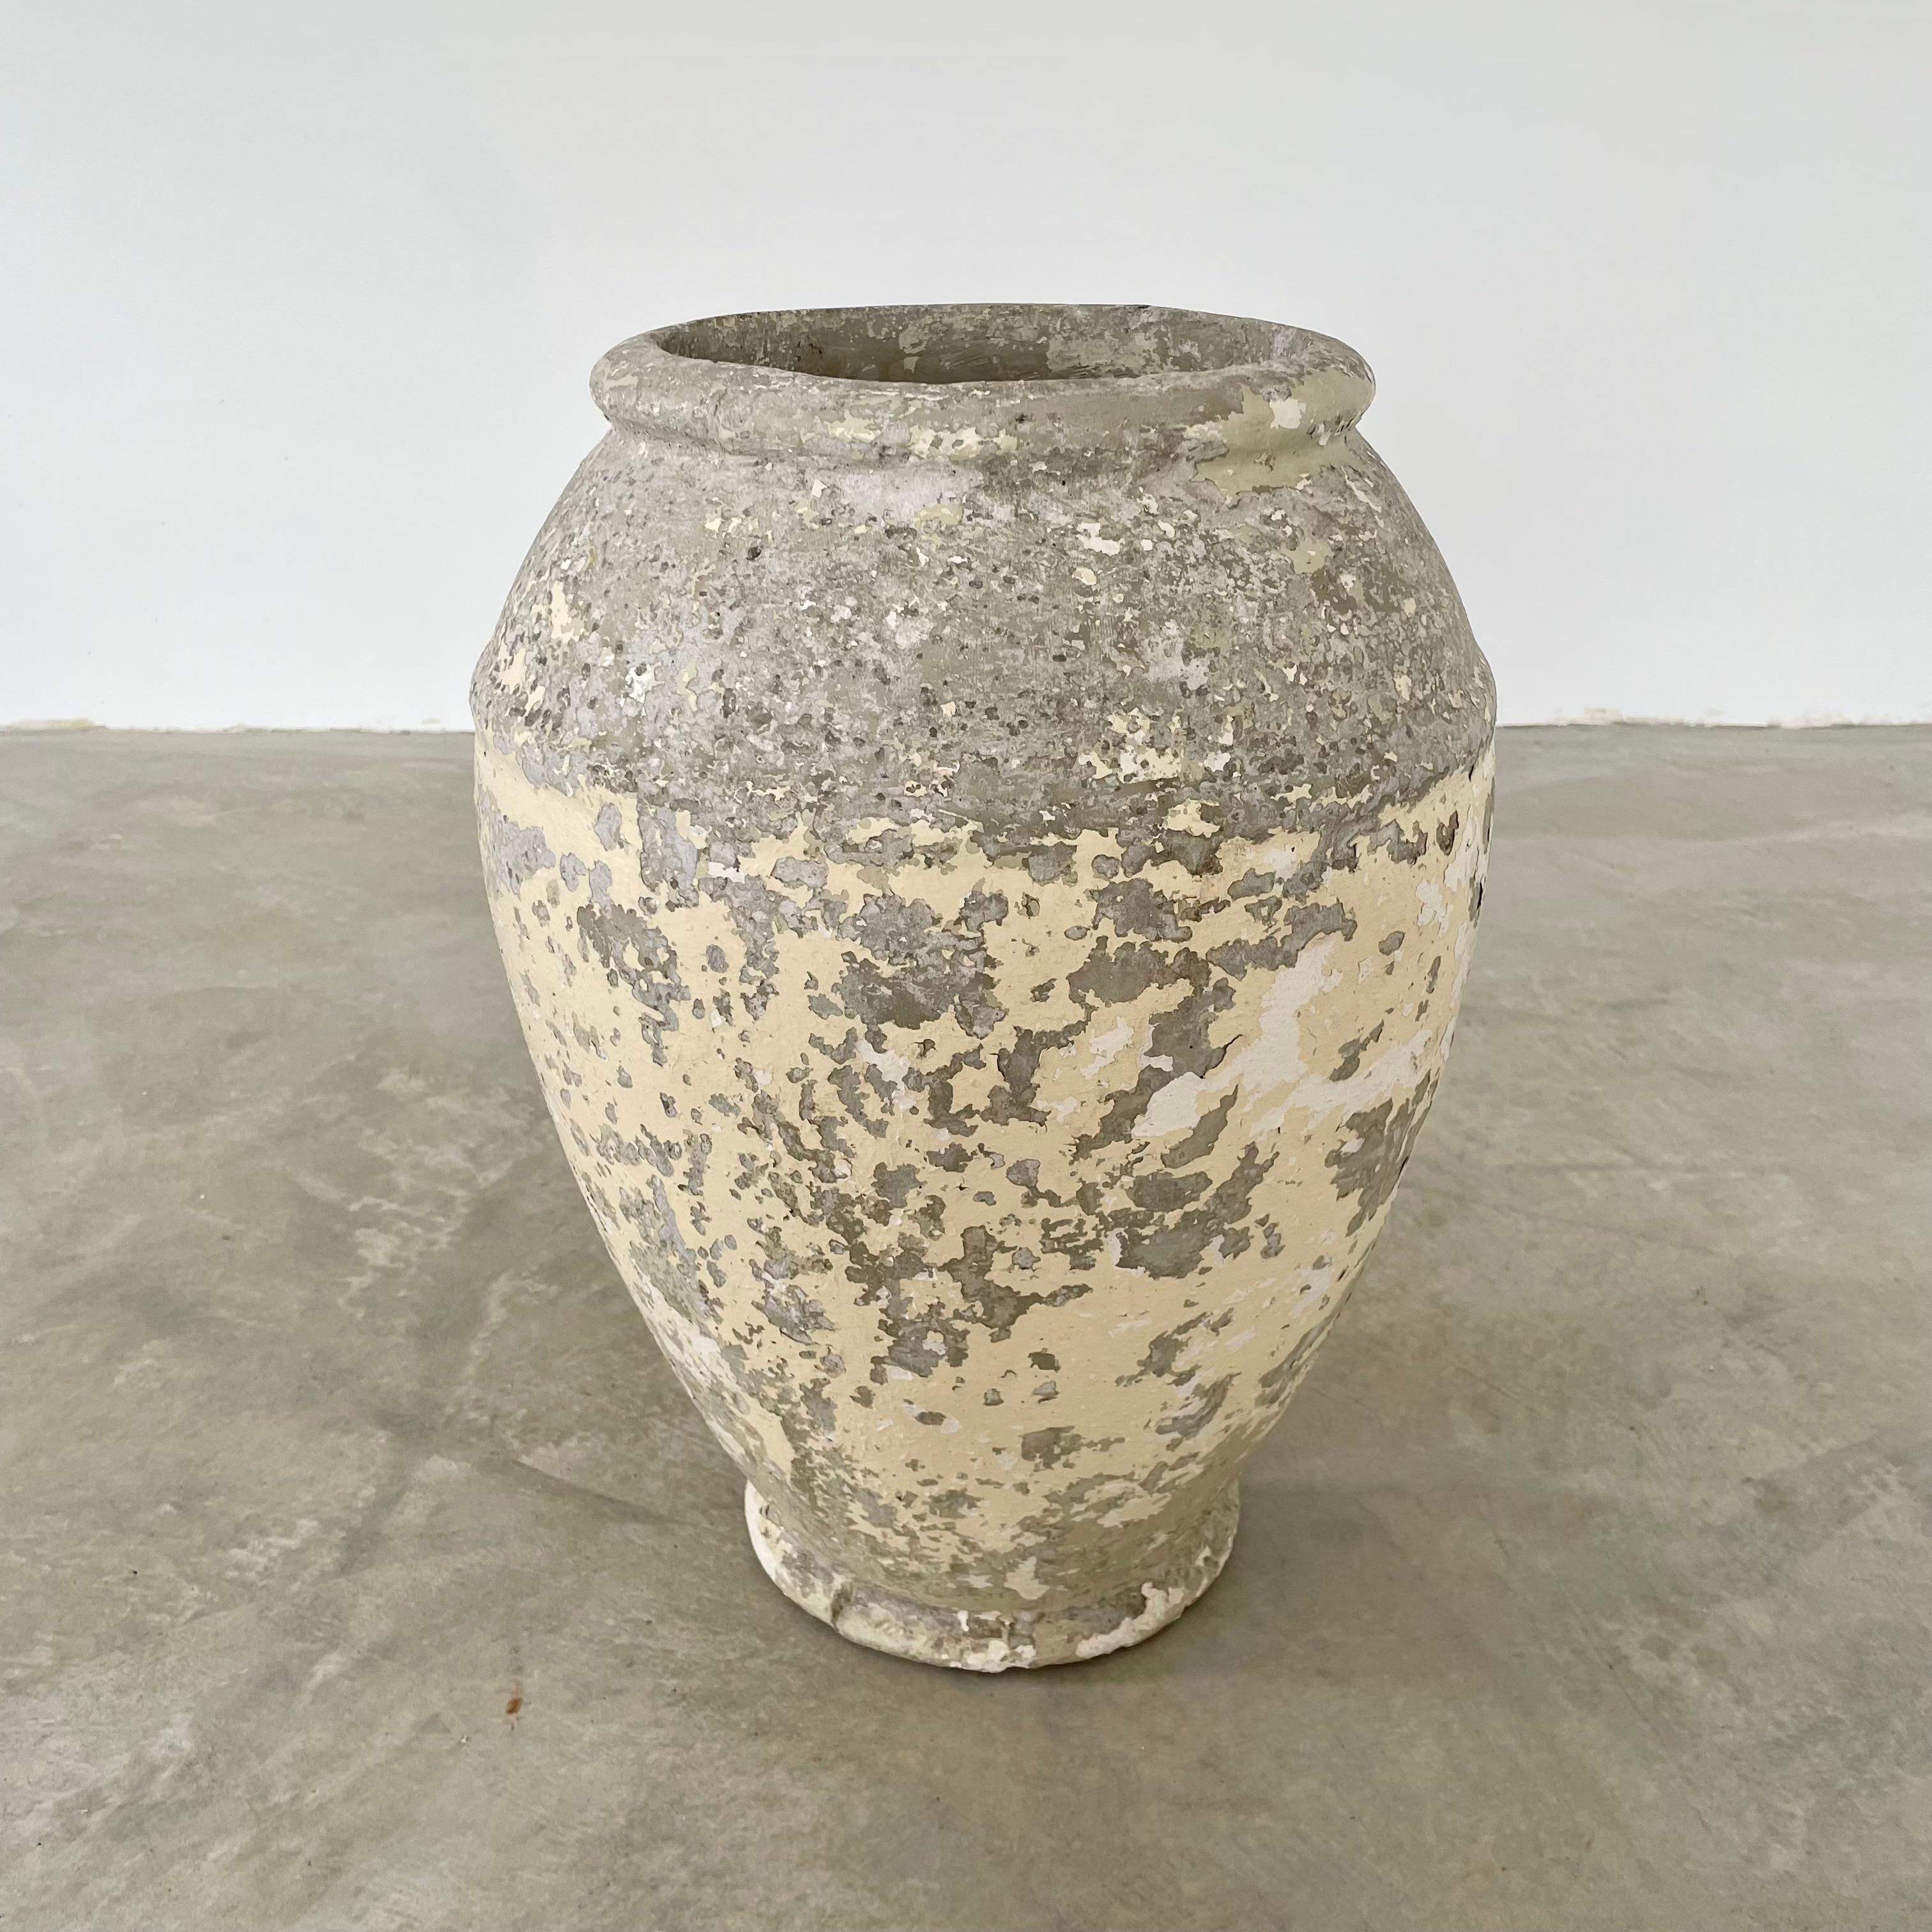 Concrete urn by Willy Guhl. Rare model. Excellent pastel yellow and grey patina. Urn has a delicate cement ridge around the mouth as well as around the widest part of the jar giving it depth and delicate lines. The body of the jar tapers down to the